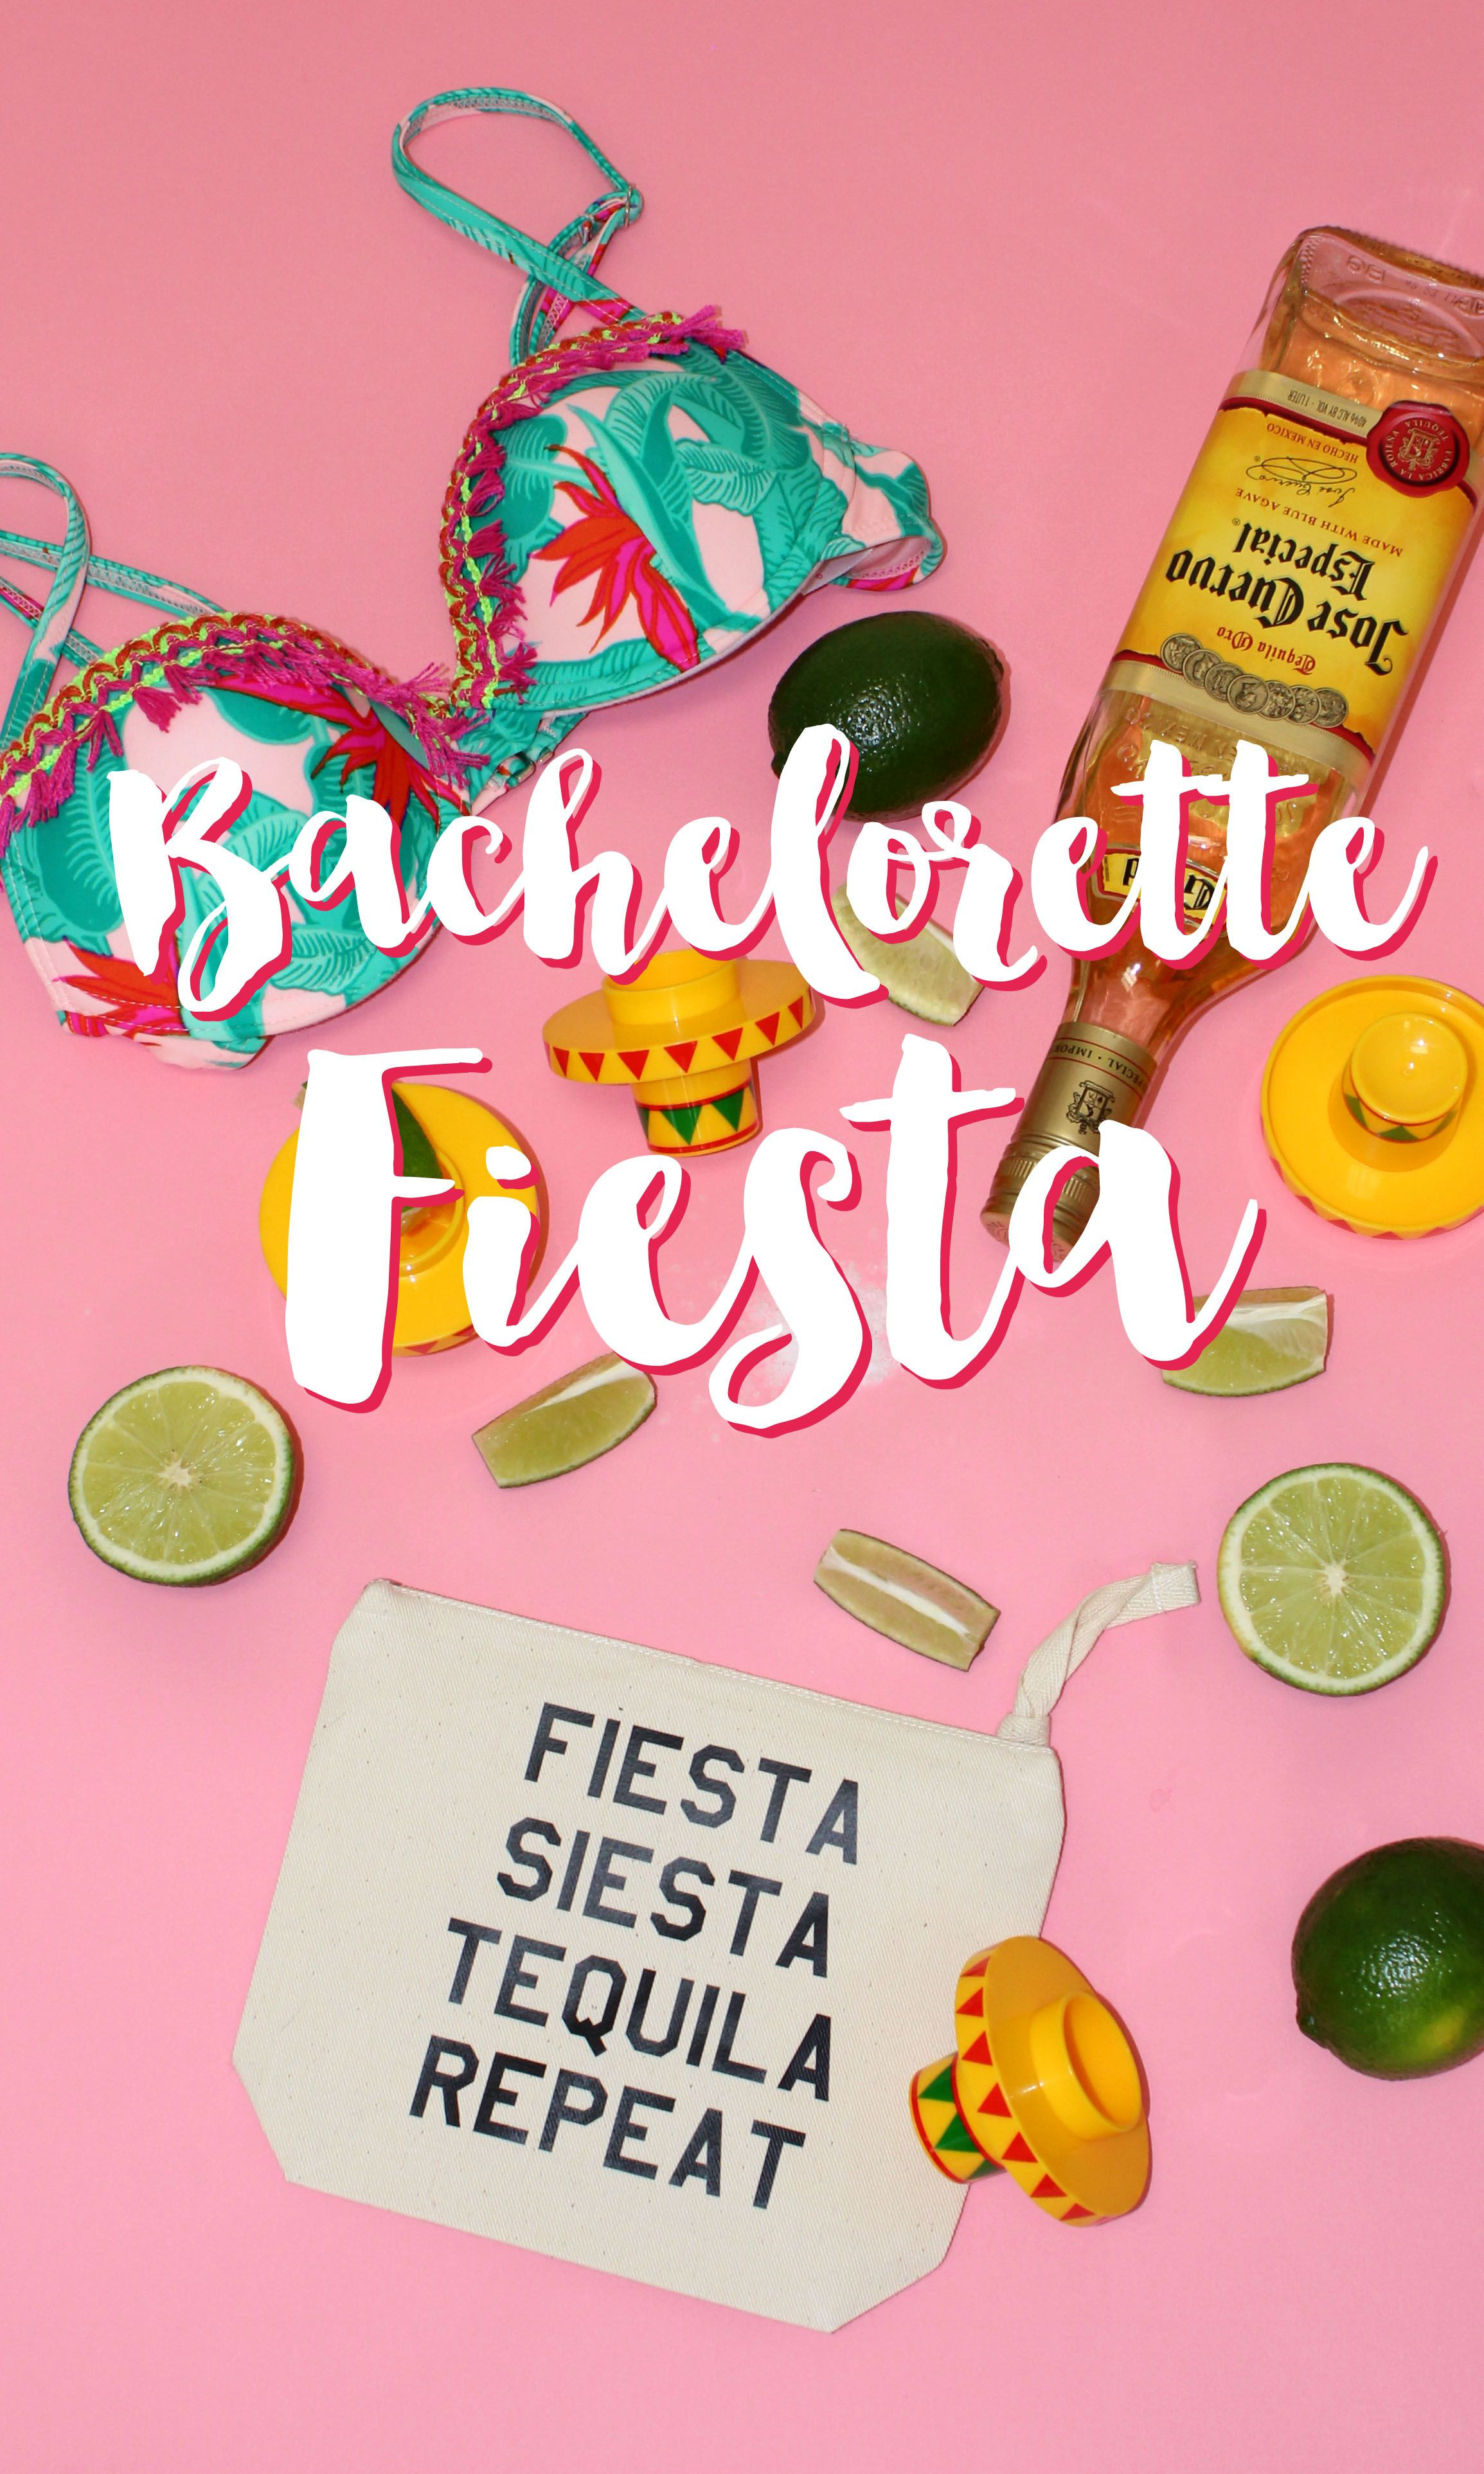 Mexican Bachelorette Party Ideas
 How to throw a fiesta themed bachelorette party